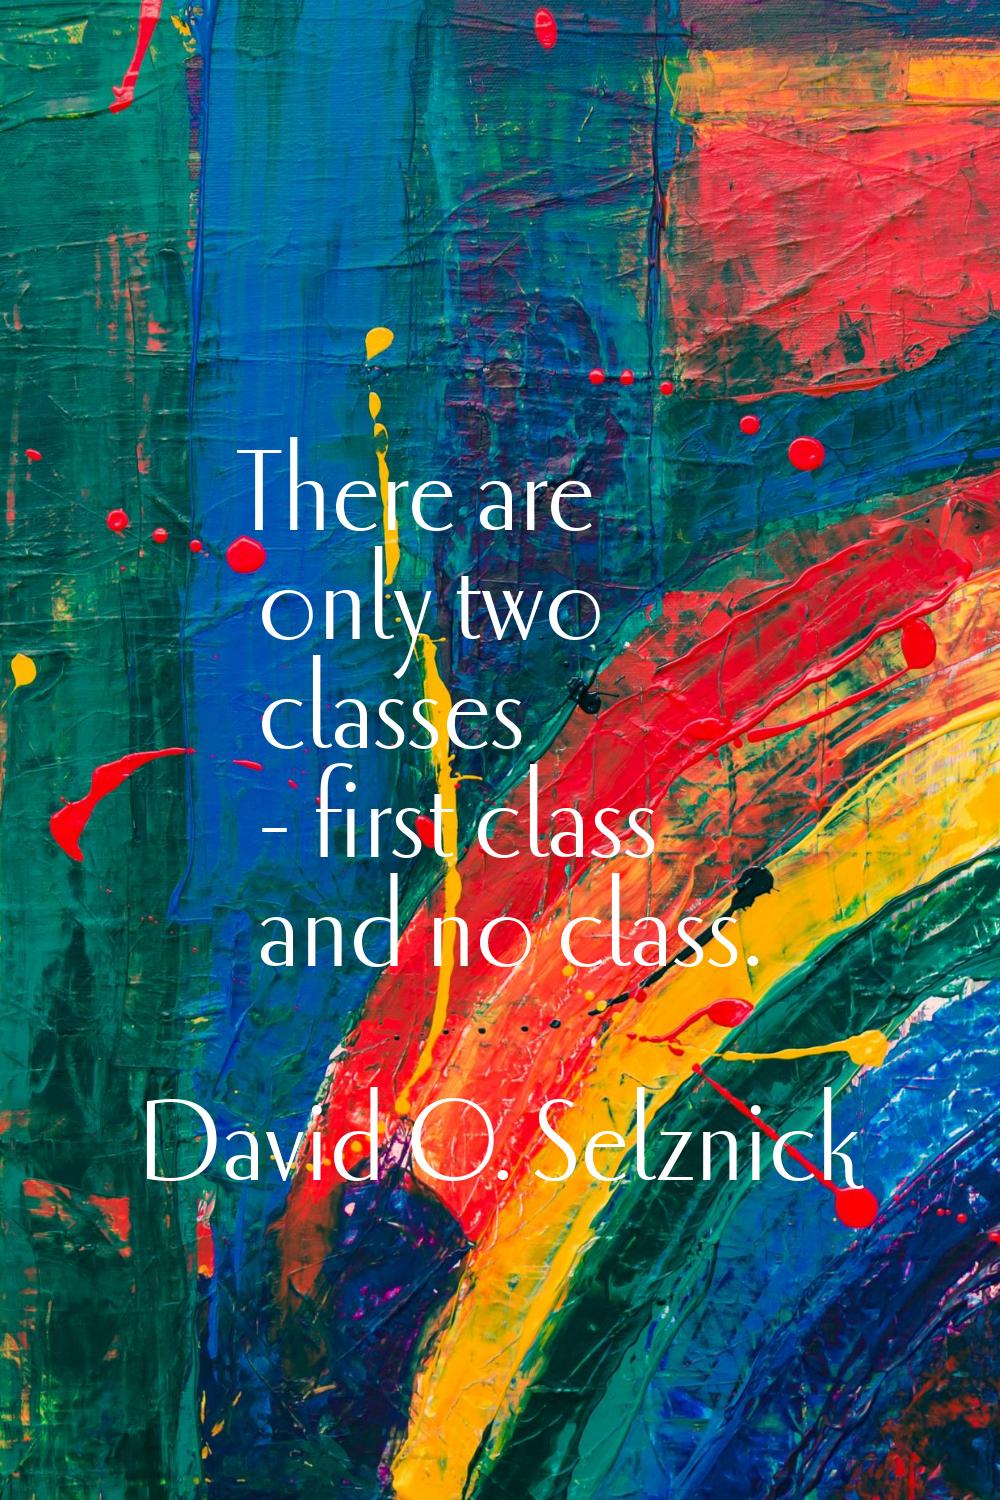 There are only two classes - first class and no class.